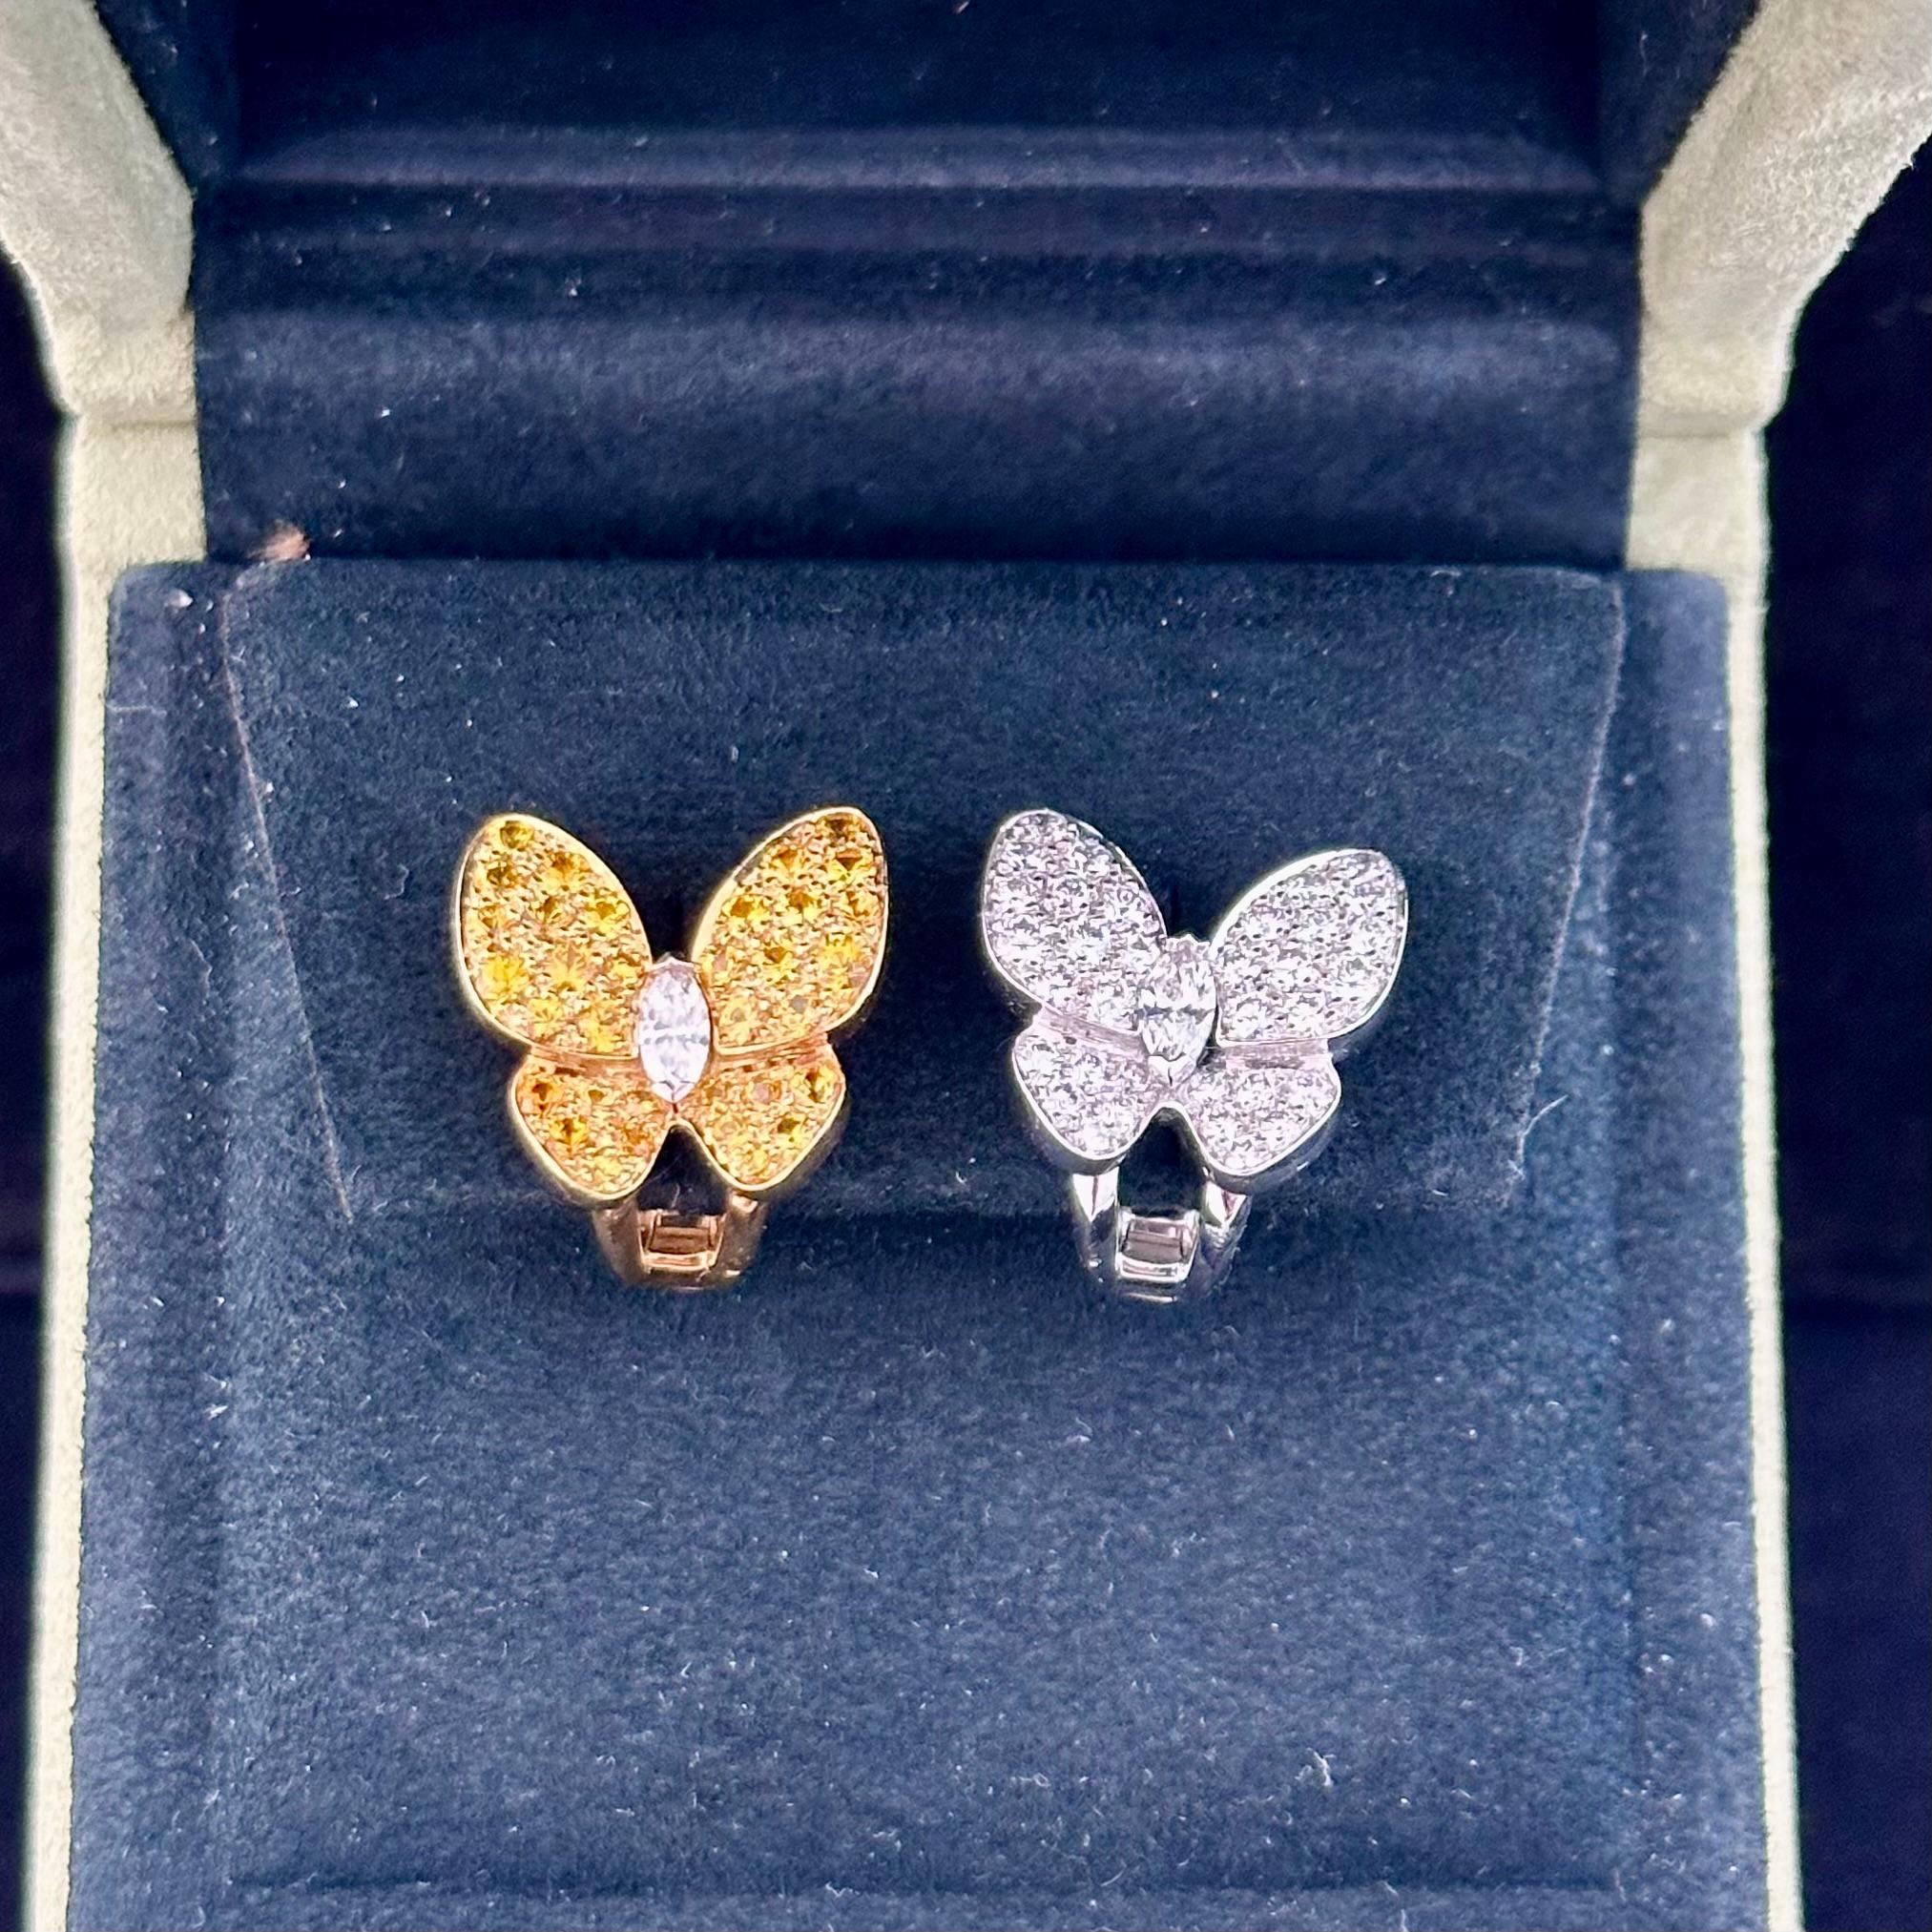 VCA: Two Butterfly earrings, 18K yellow gold, round yellow sapphires, rhodium plated 18K white gold, round and marquise-cut diamonds; diamond quality DEF, IF to VVS

REFERENCE
VCARB15100
STONE
STONE Diamond: 36 stones, 0.99 carat
STONE Sapphire: 34